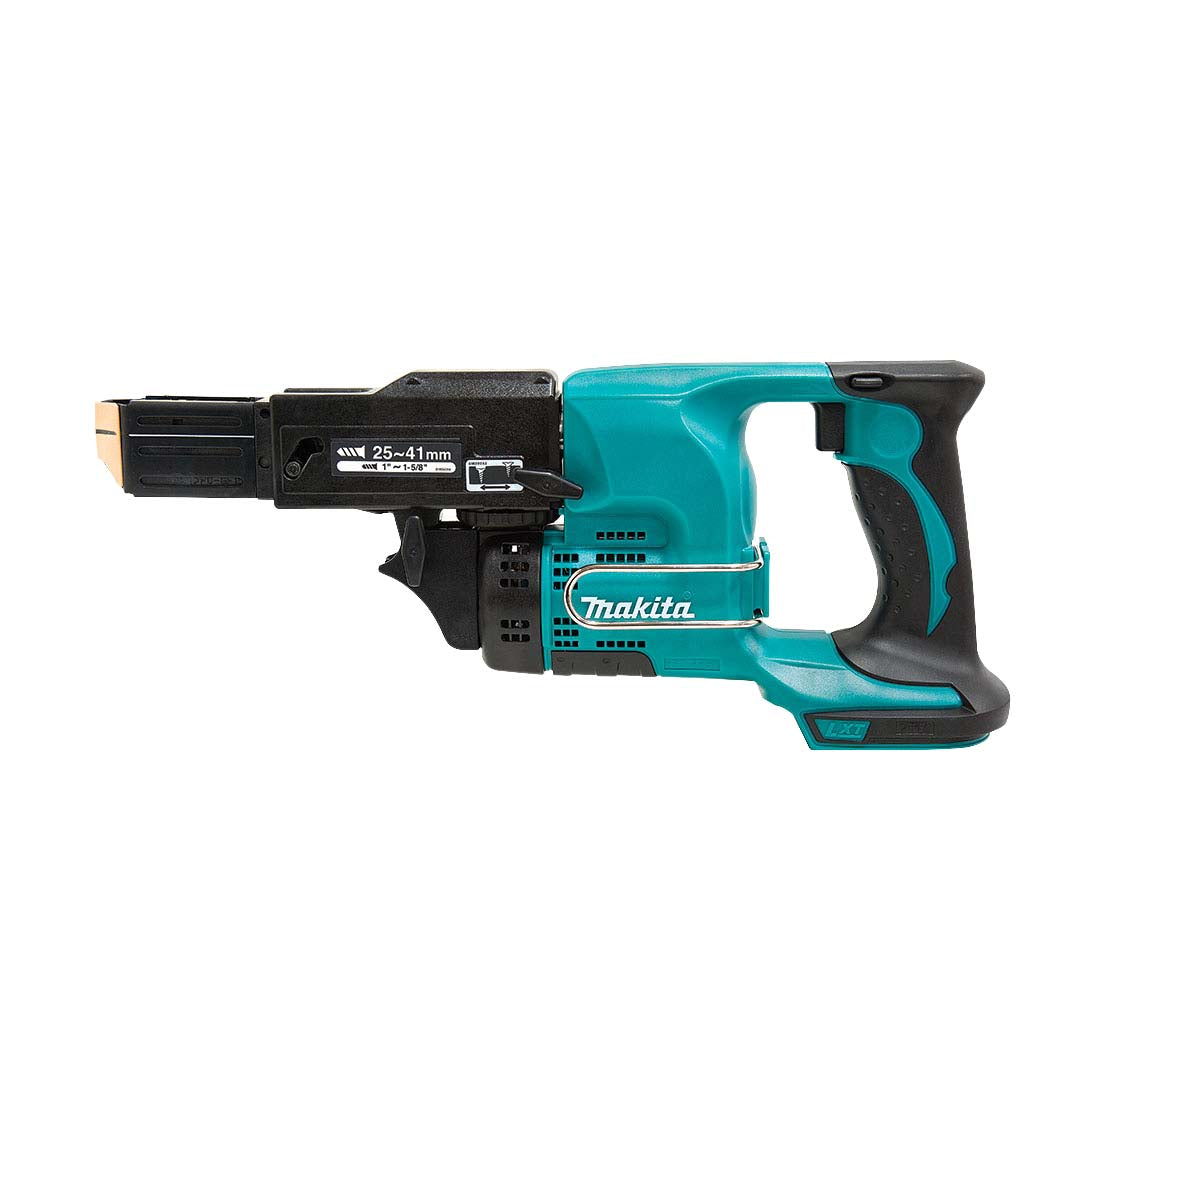 18V Autofeed Screwdriver Bare (Tool Only) DFR450ZX by Makita